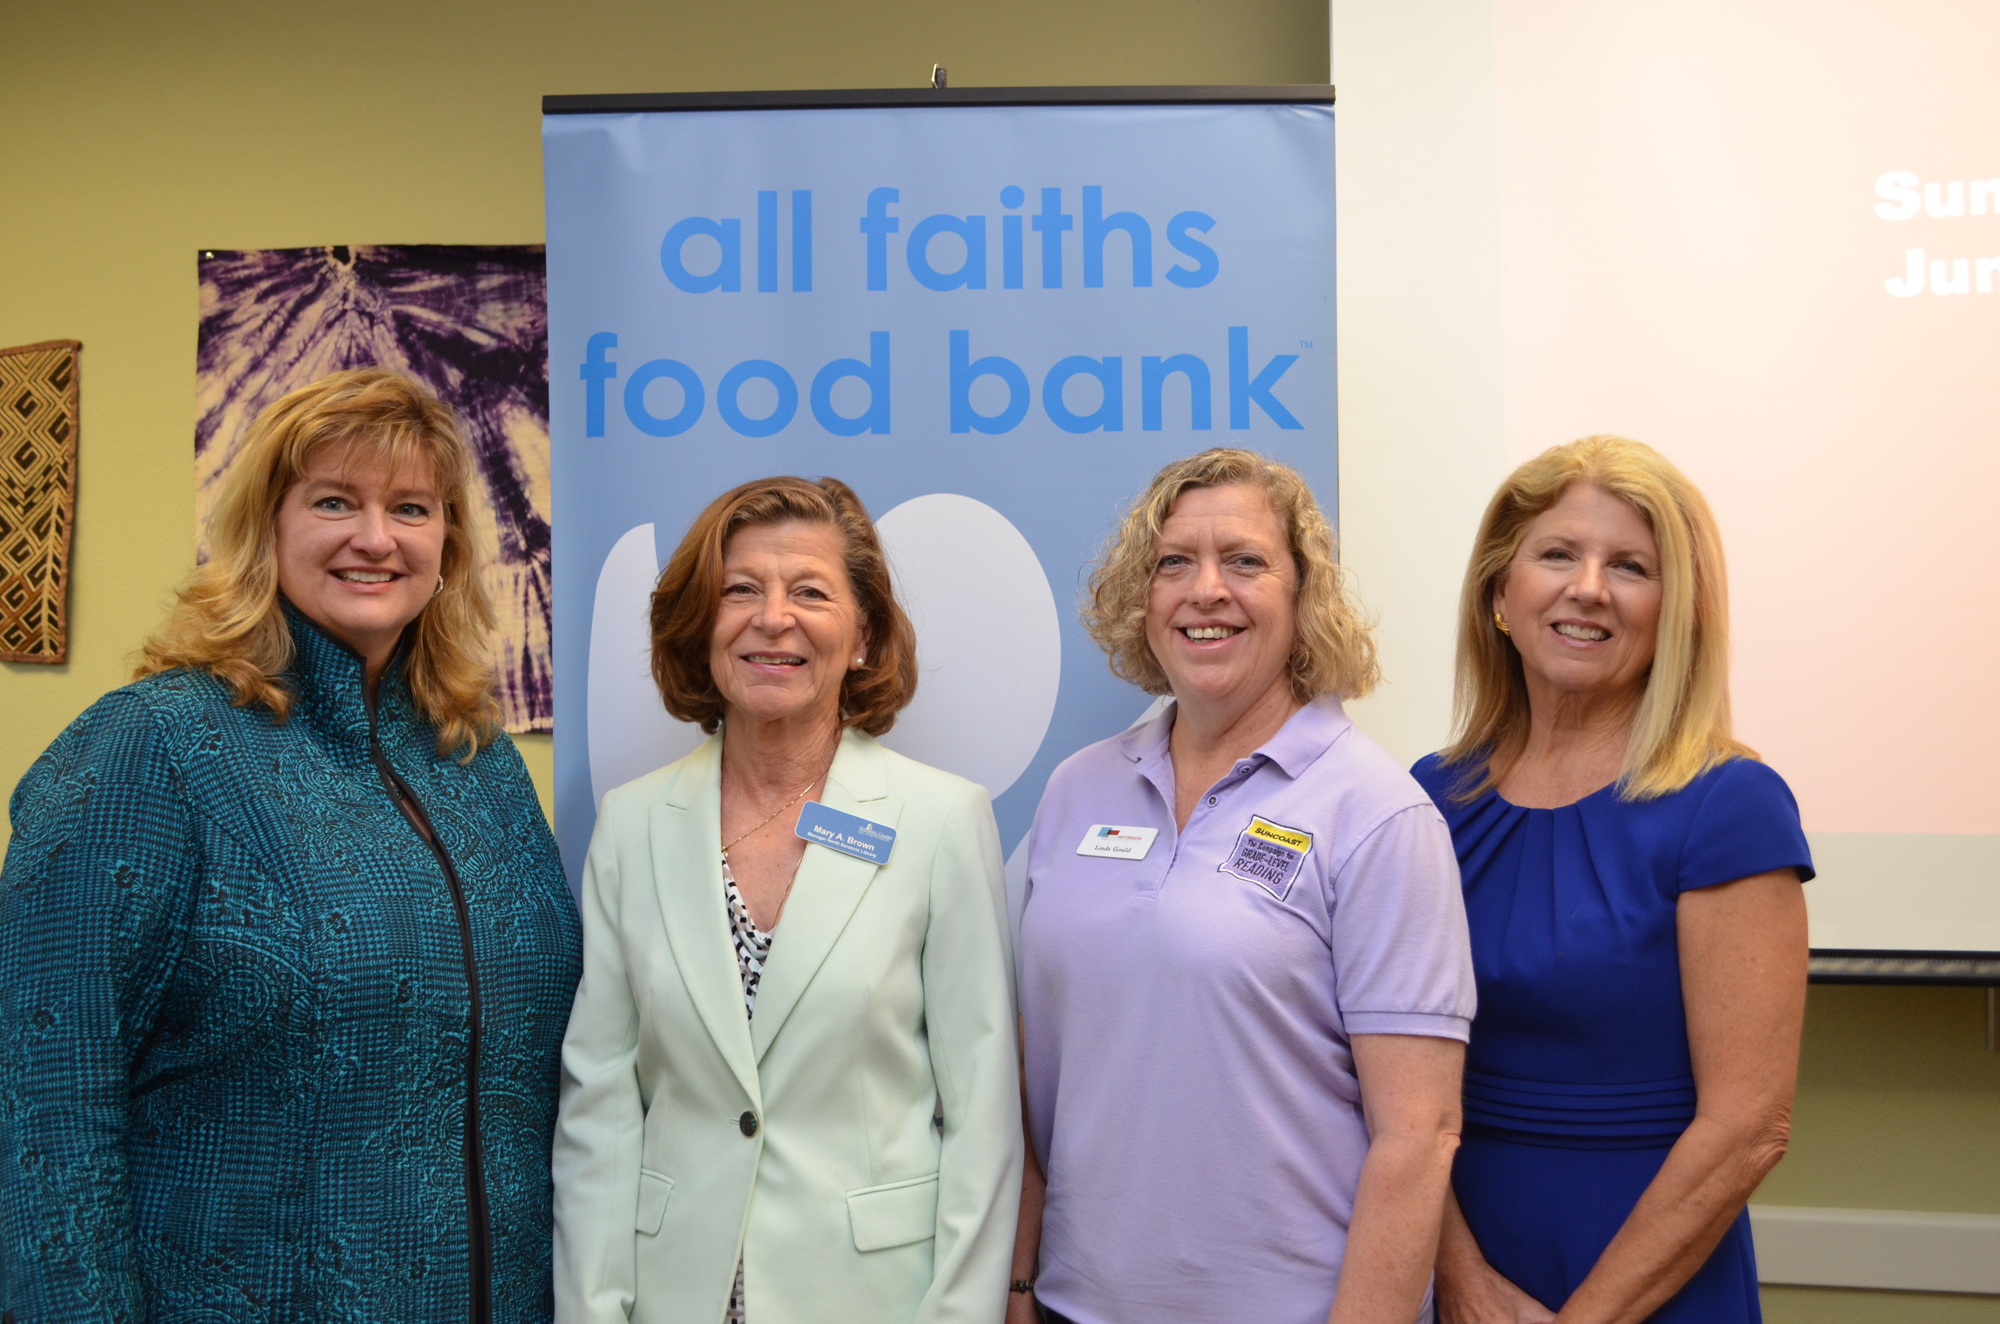 Sarasota County Schools Food and Nutrition Services Beverly Girard, North Sarasota Library Manager Mary Brown, Linda Gould and All Faiths Food Bank CEO Sandra Frank.